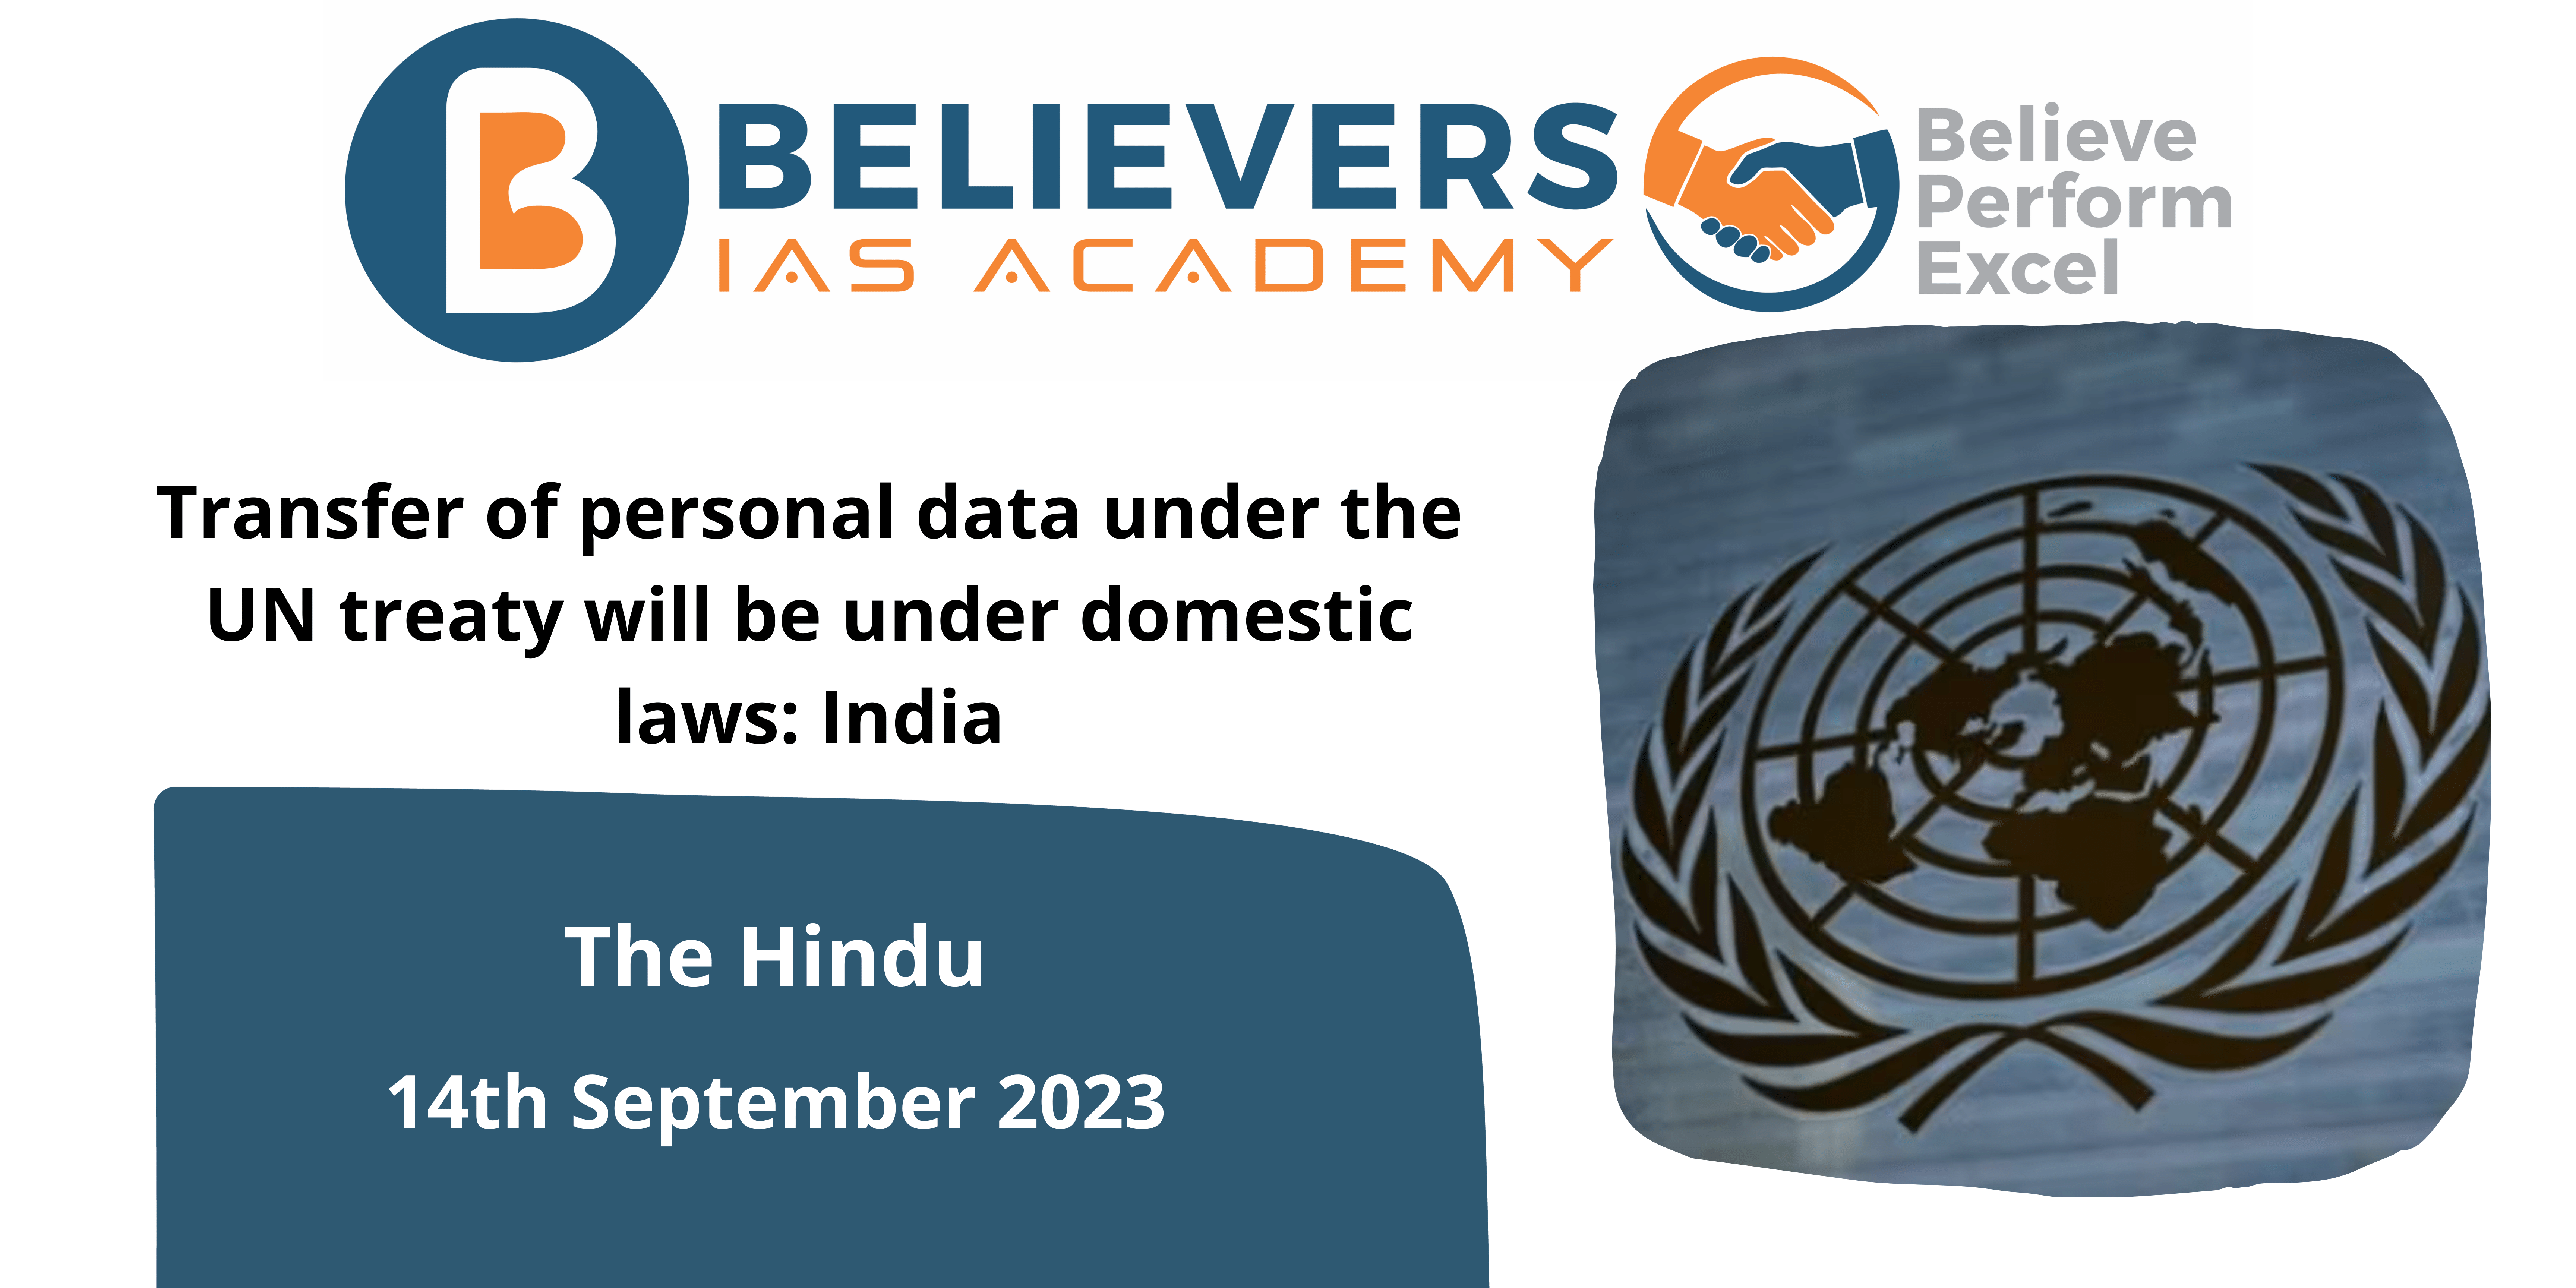 Transfer of personal data under the UN treaty will be under domestic laws: India